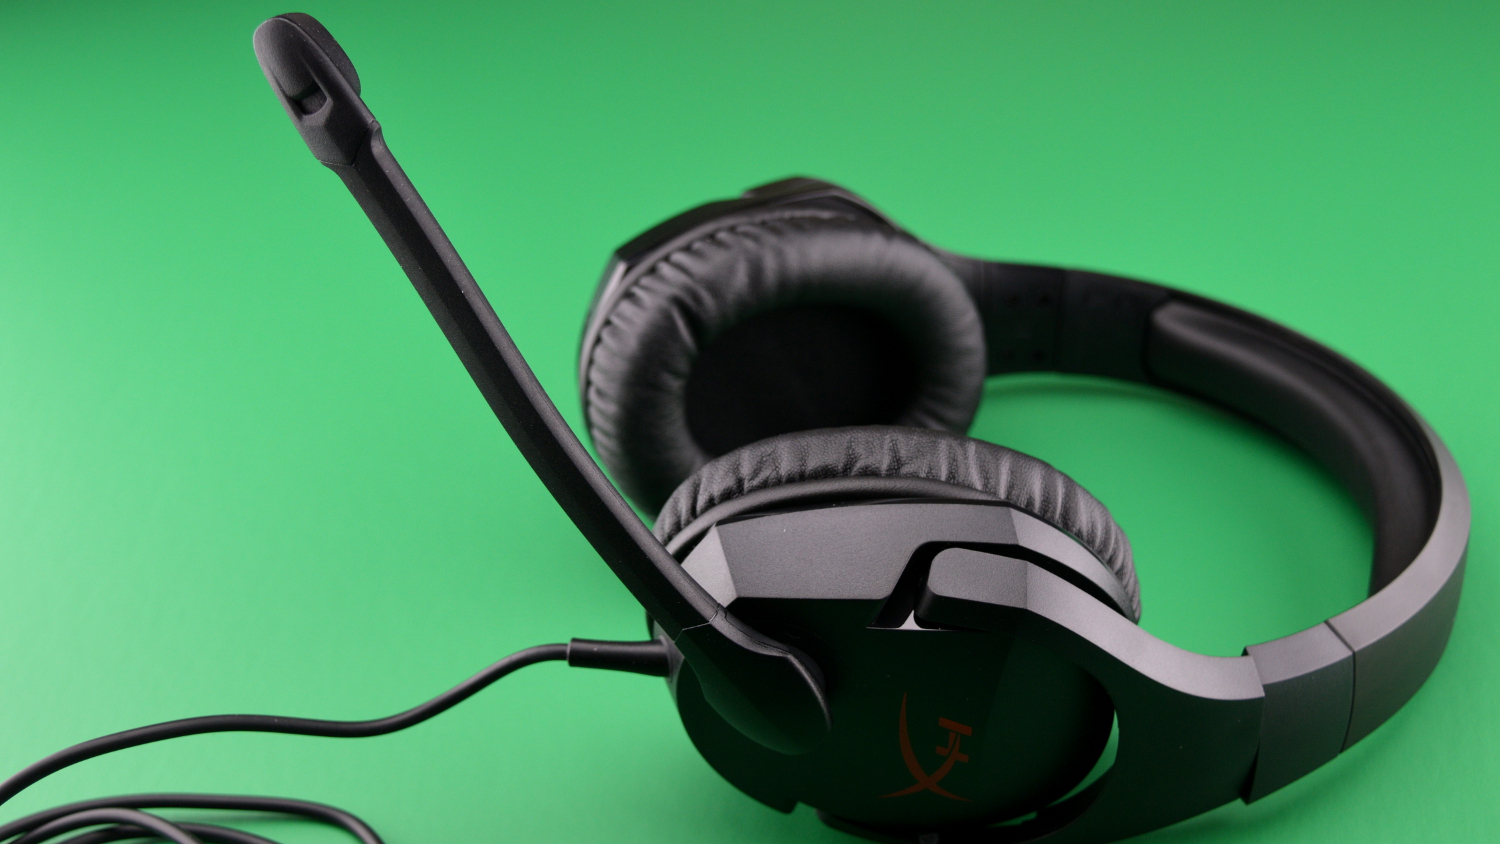 HyperX Cloud Stinger review: Basic and affordable - SoundGuys